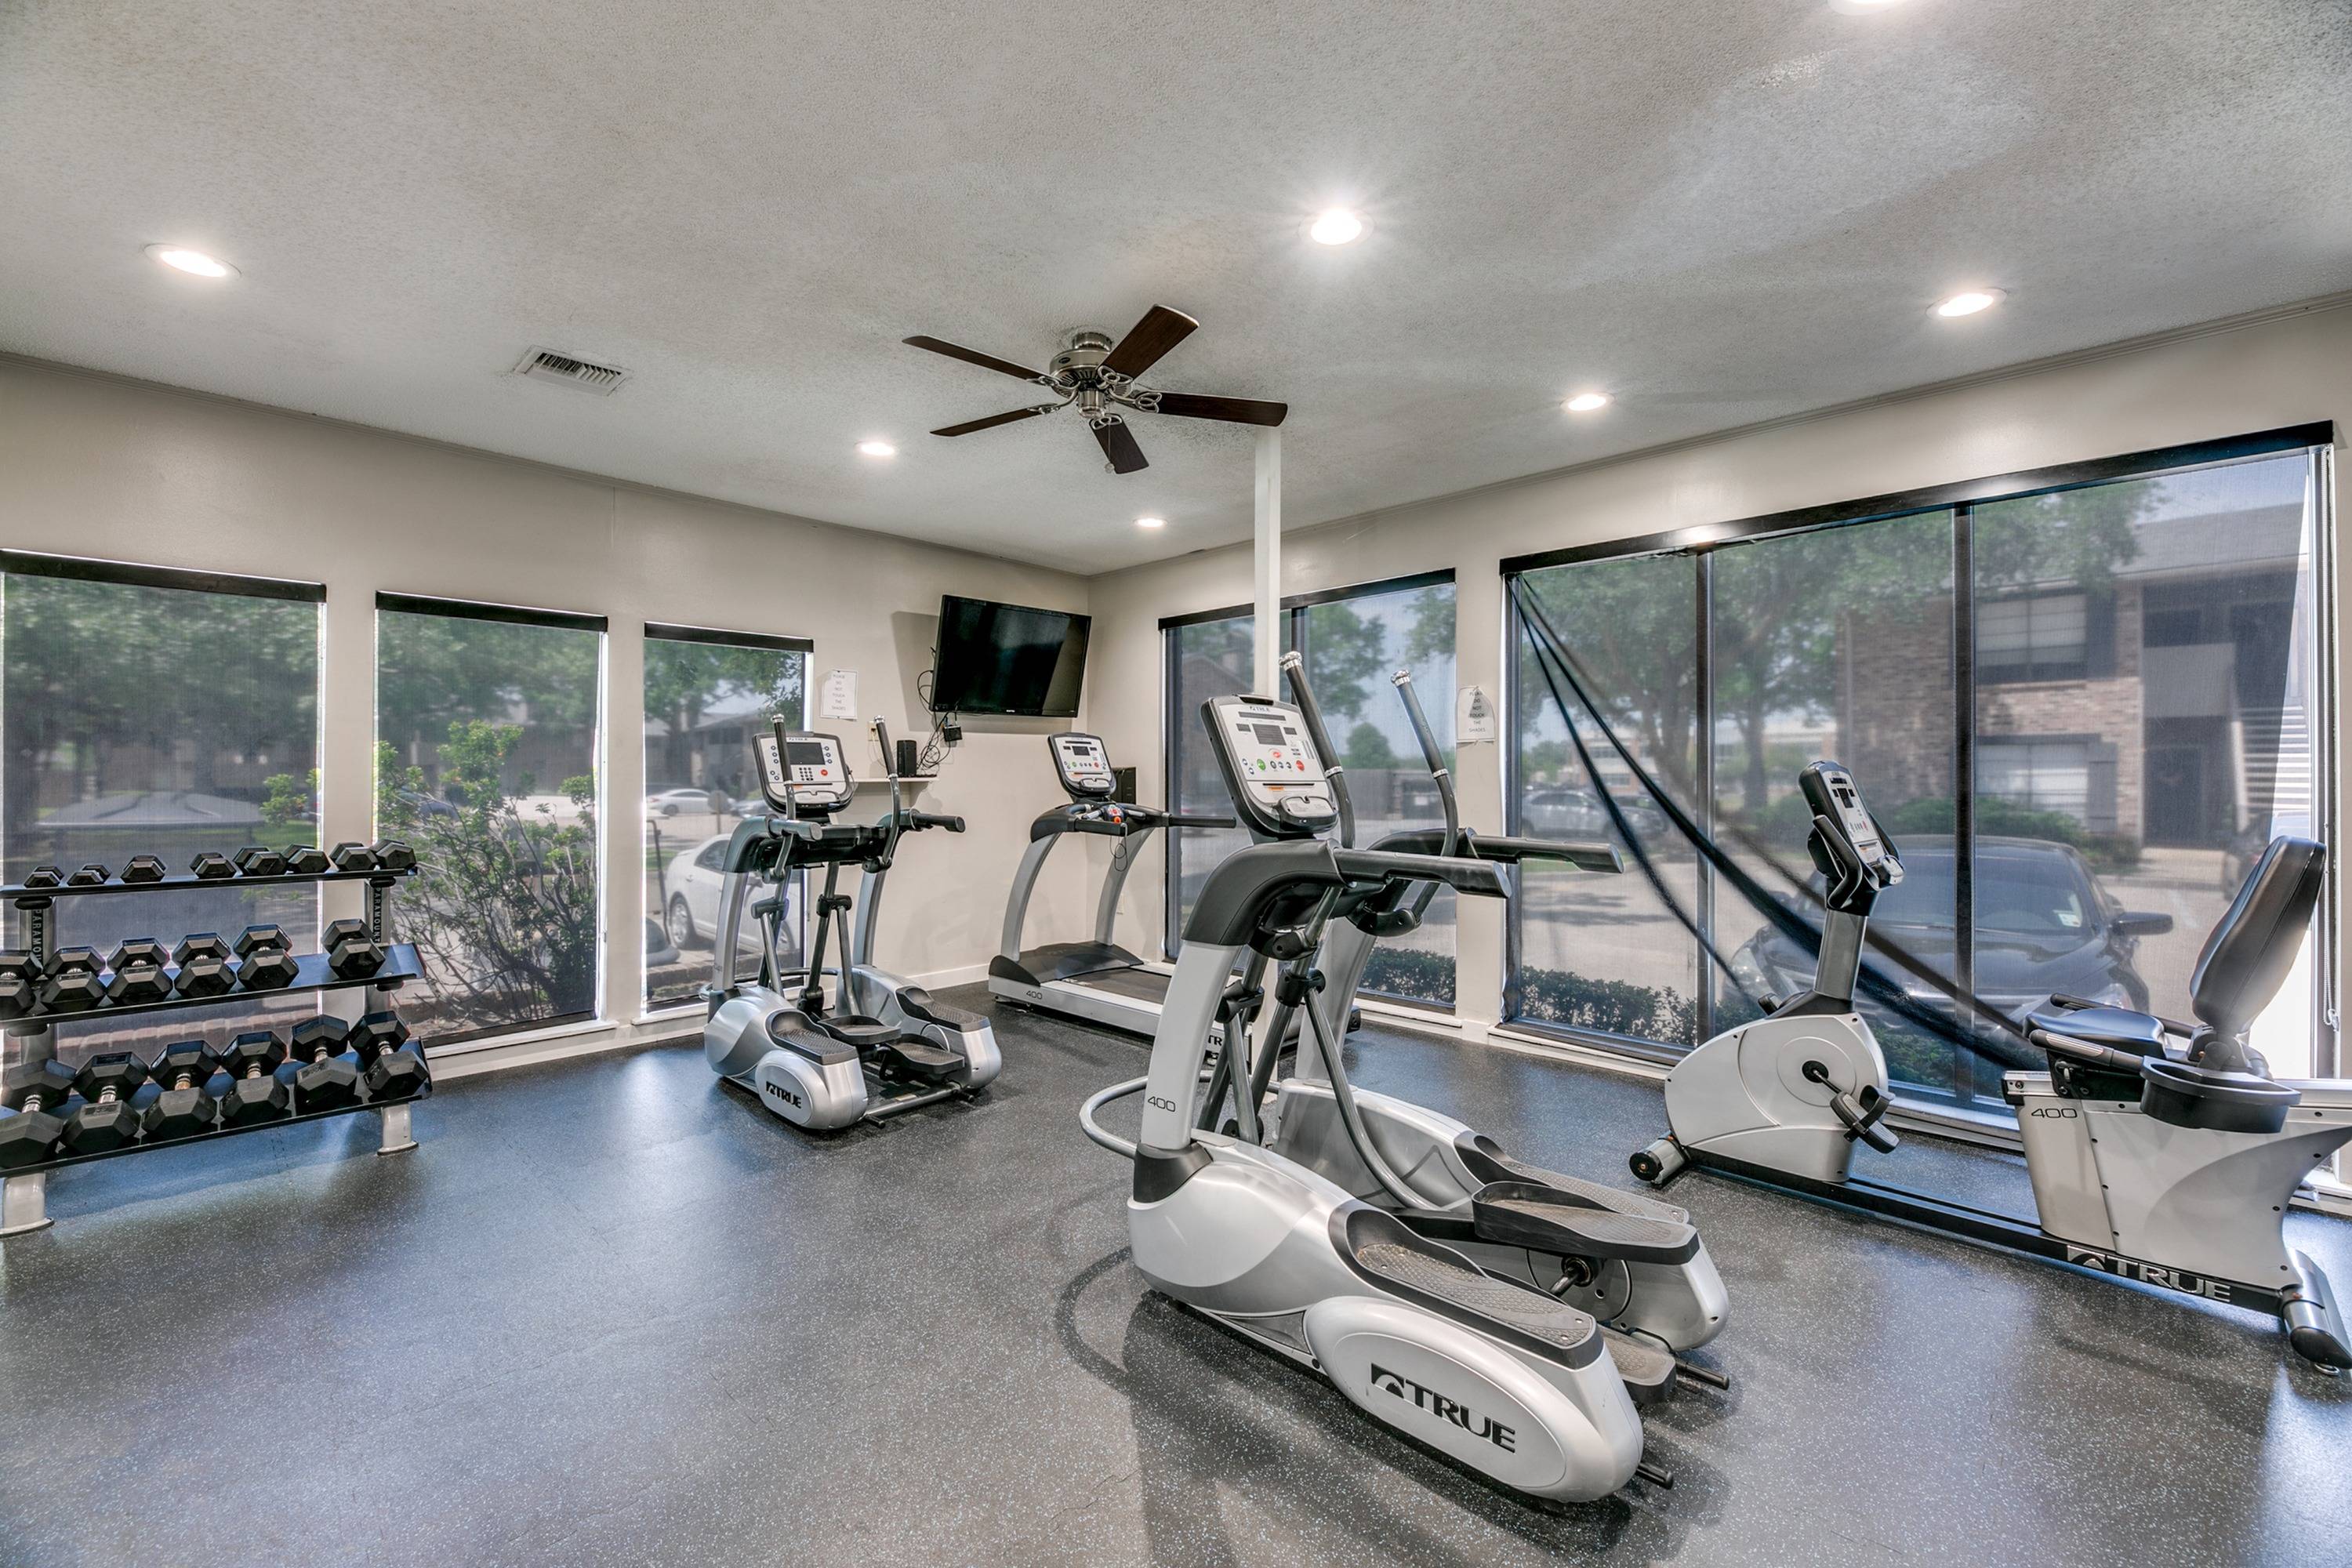 Fitness Center that includes cardio and weights